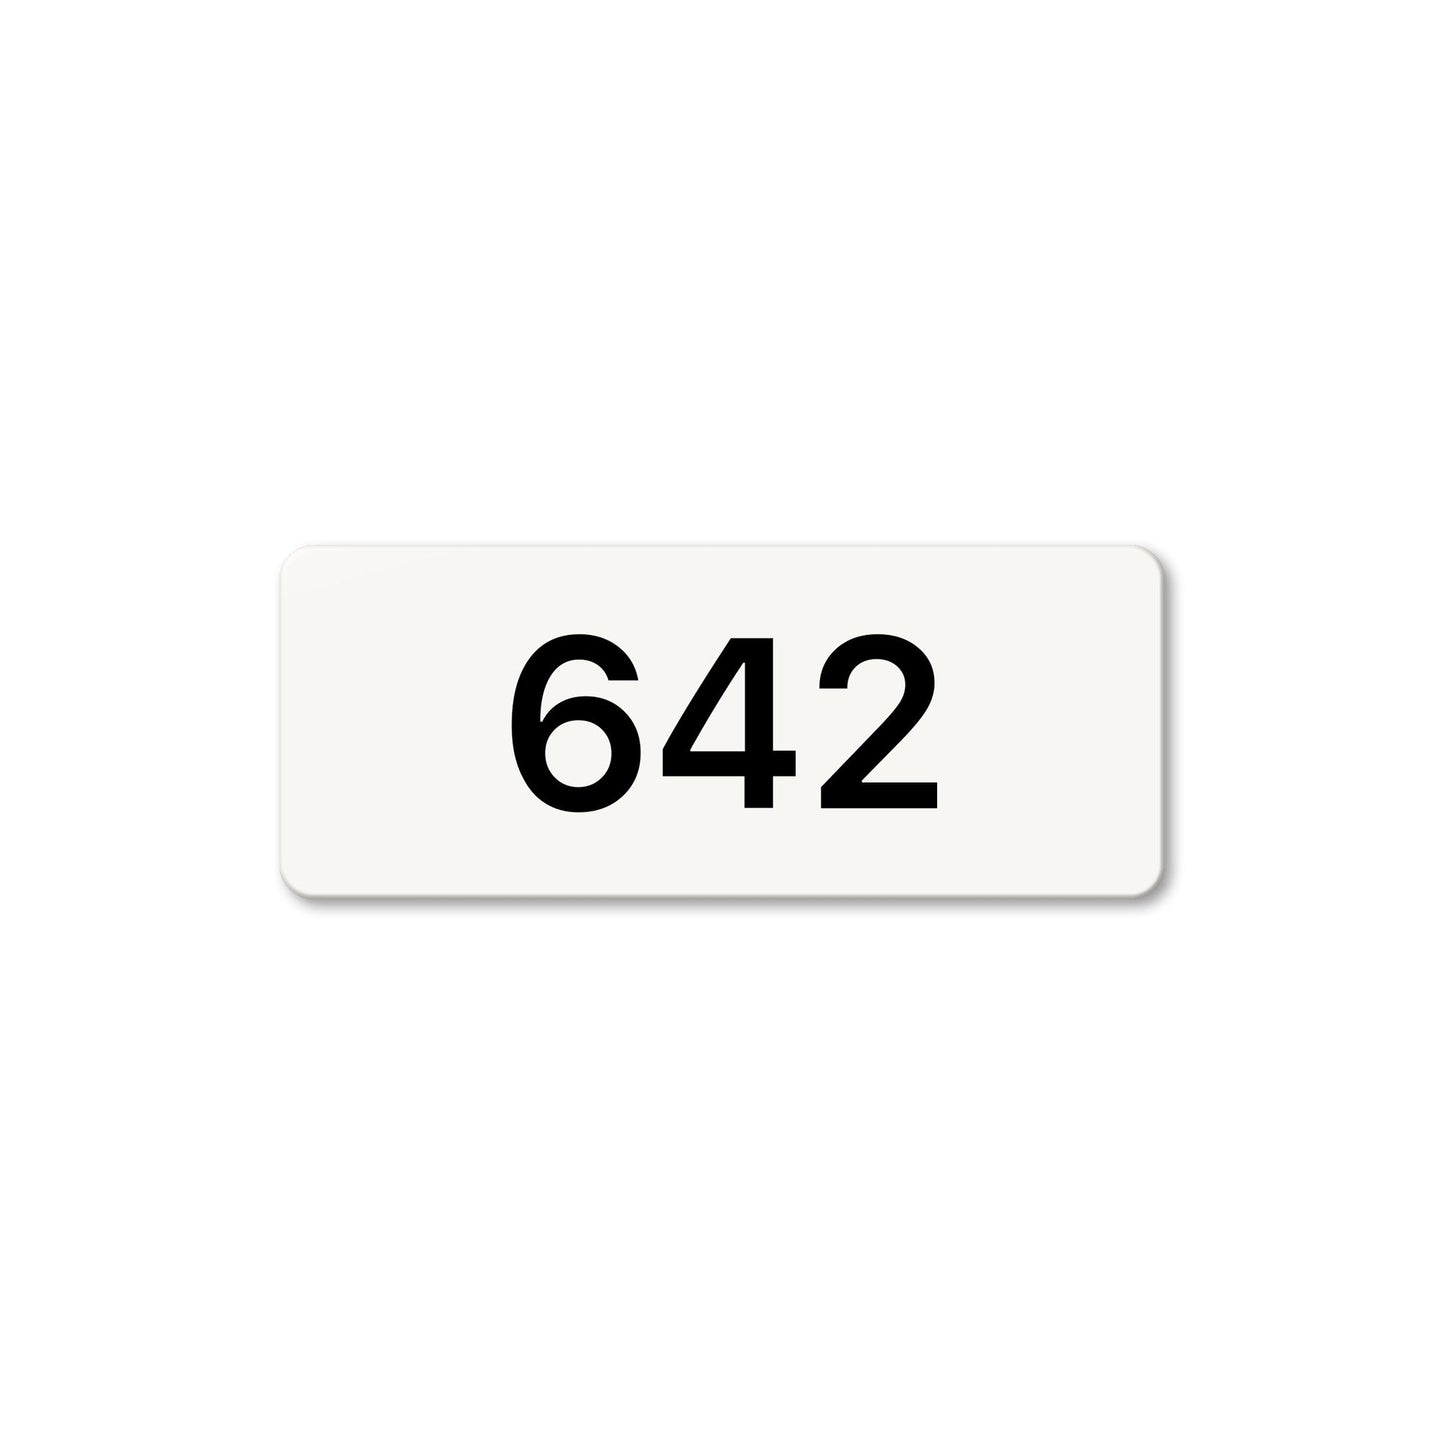 Numeral 642